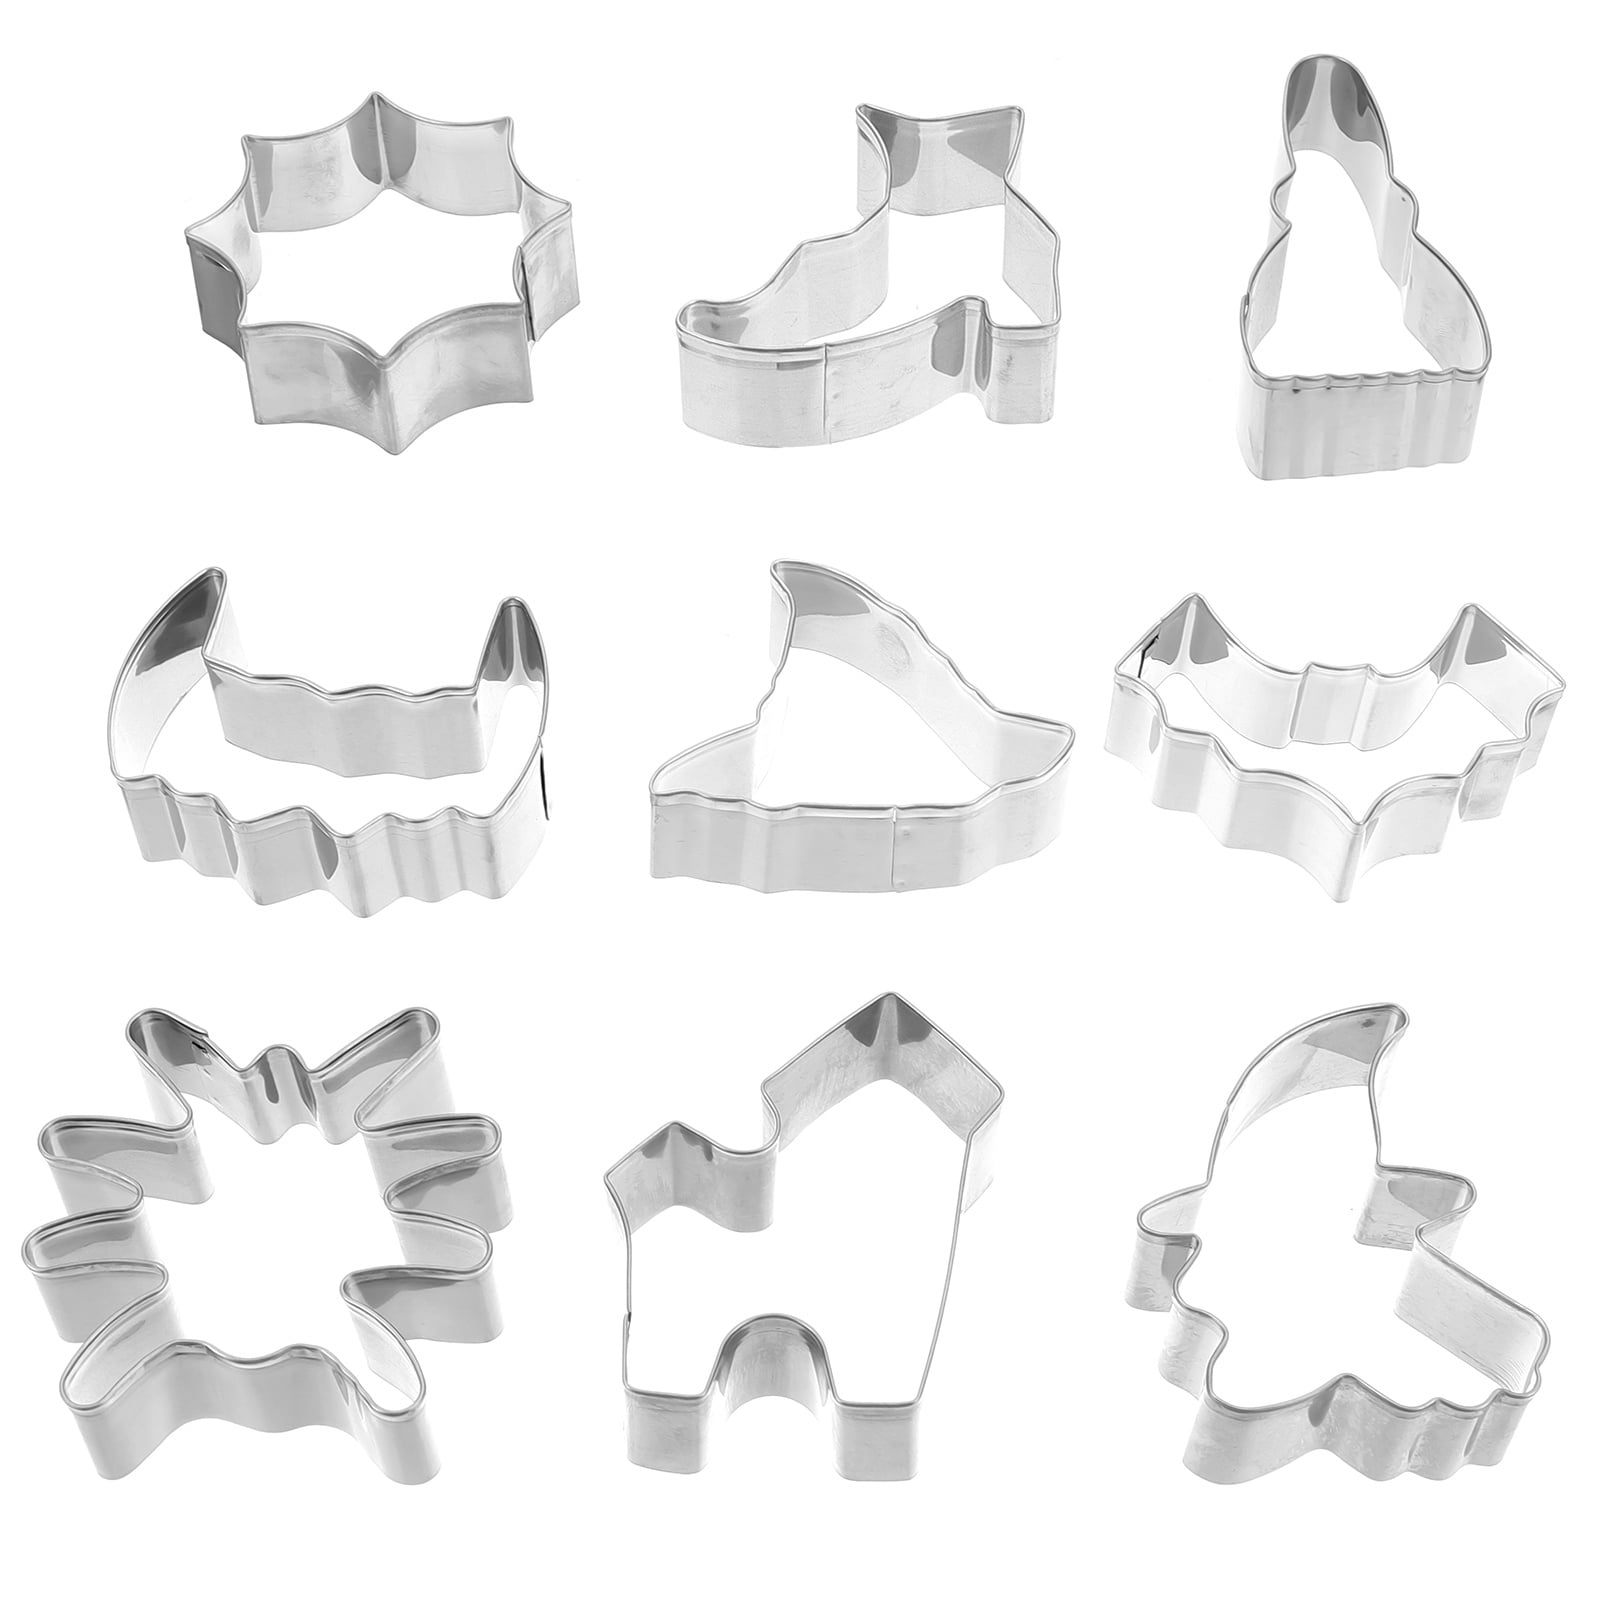 9Pcs Number Stainless Steel Cookie Biscuit Cutter Set Mould Mold DIY Baking Tool